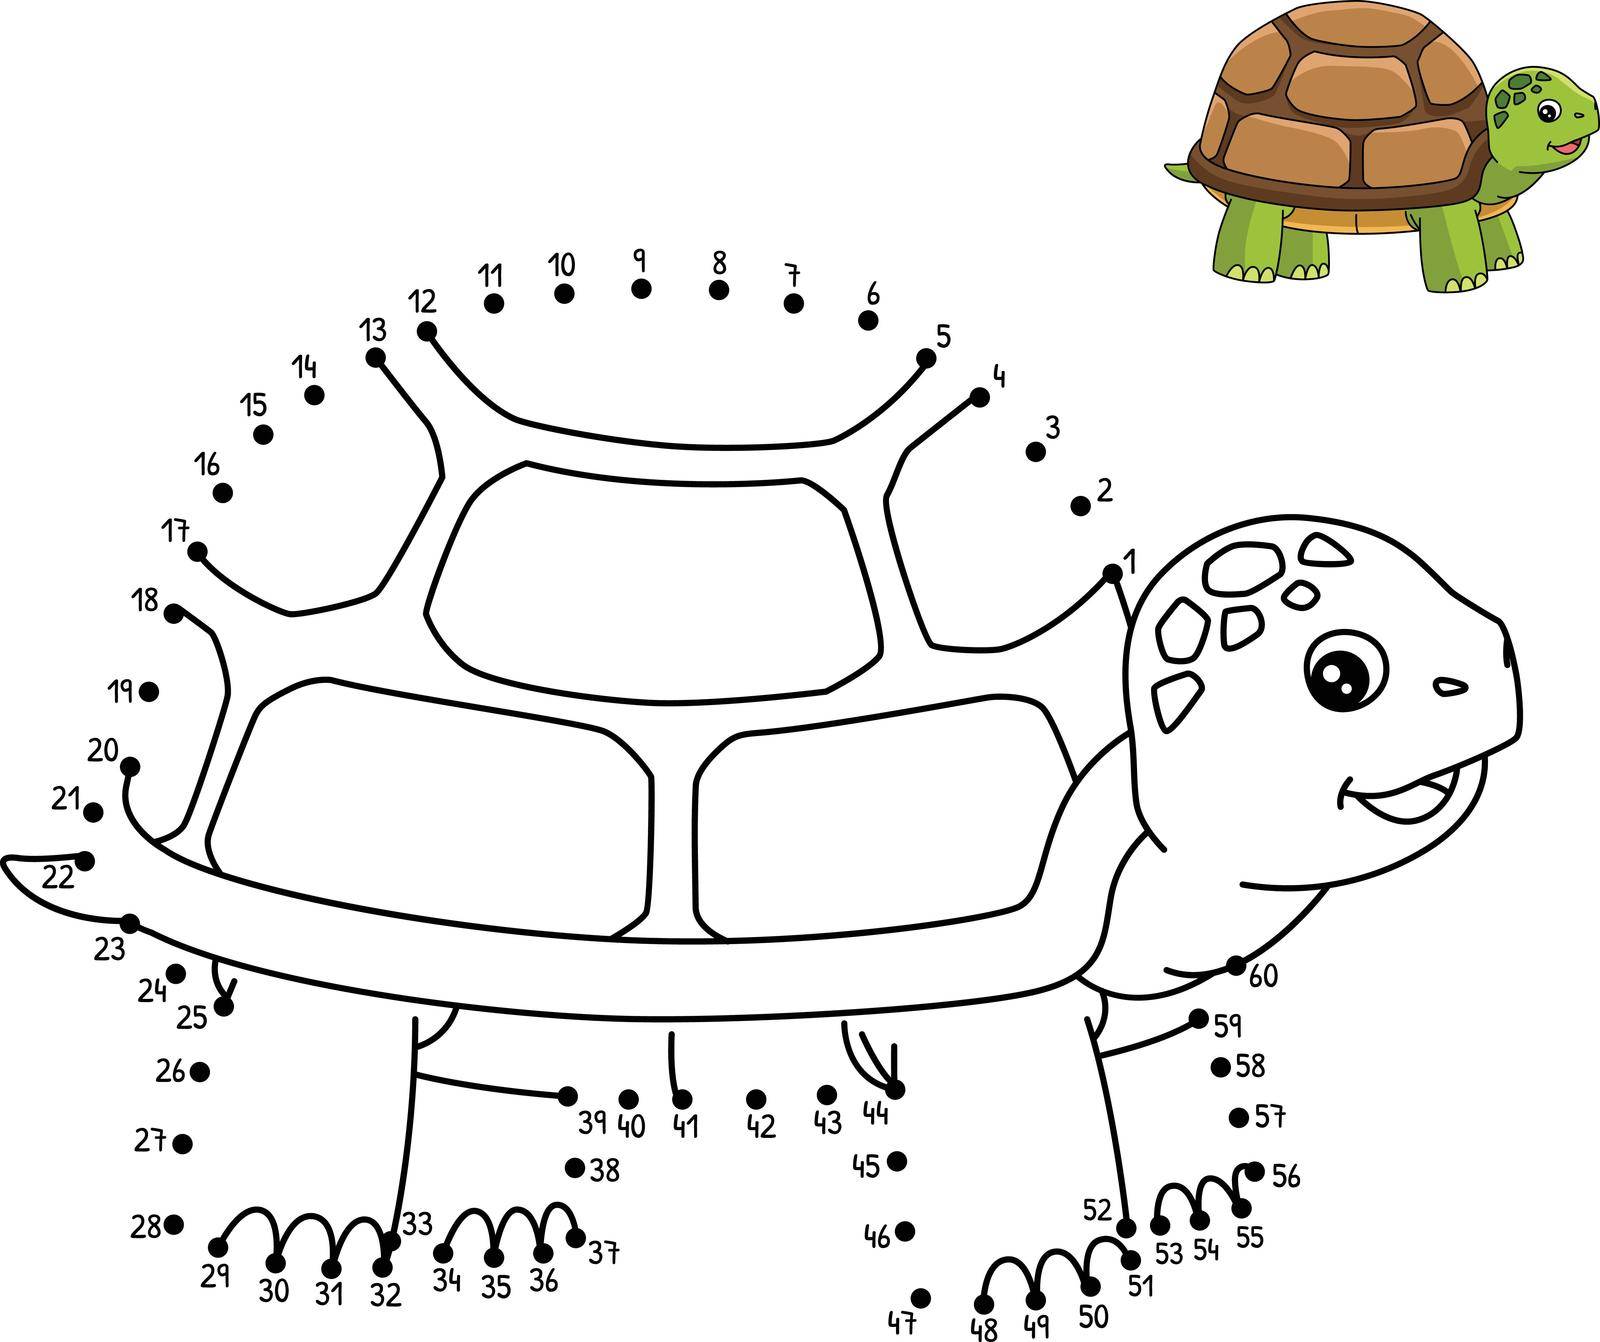 A cute and funny connect-the-dots coloring page of a Turtle. Provides hours of coloring fun for children. Color, this page is very easy. Suitable for little kids and toddlers.